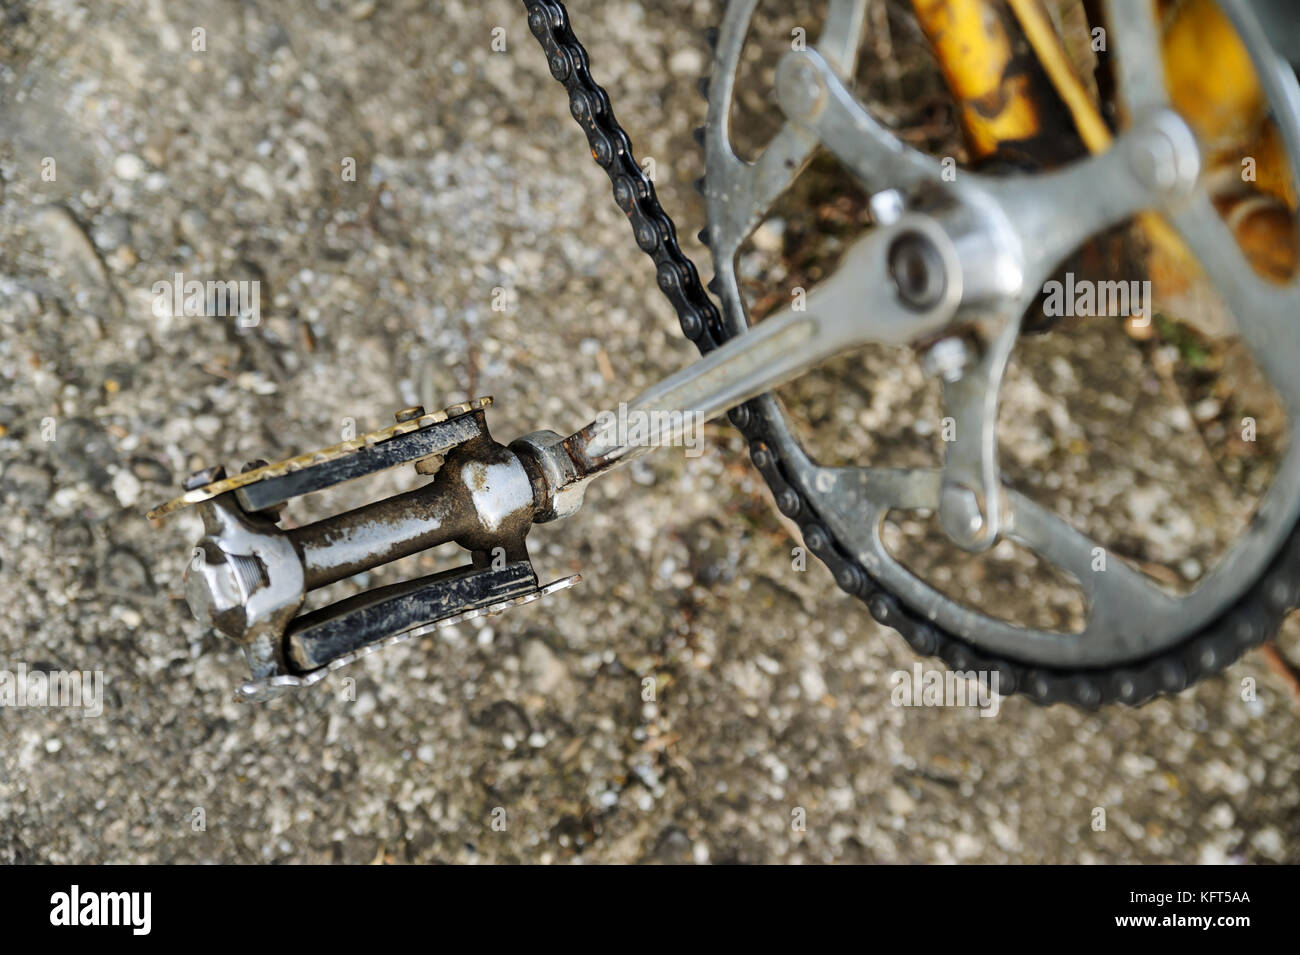 Old metal bicycle pedal. Pedal with gears and chain. Top view. Stock Photo